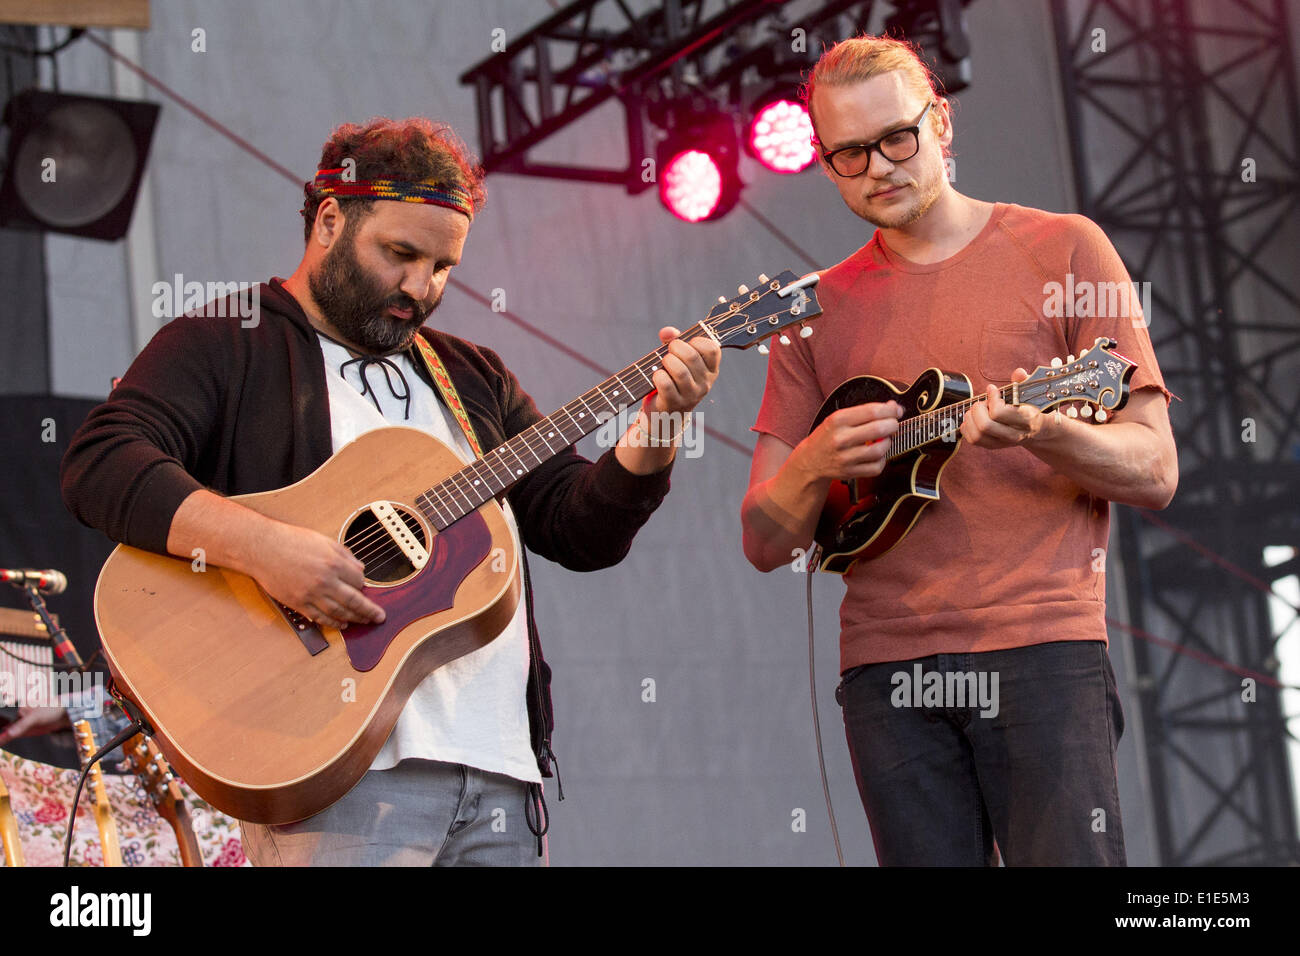 Chicago, Illinois, USA. 31st May, 2014. NICO AGLIETTI (L) and MARK NOSEWORTHY perform with Edward Sharpe and the Magnetic Zeros at the FirstMerit Bank Pavilion at Northerly Island in Chicago, Illinois © Daniel DeSlover/ZUMAPRESS.com/Alamy Live News Stock Photo